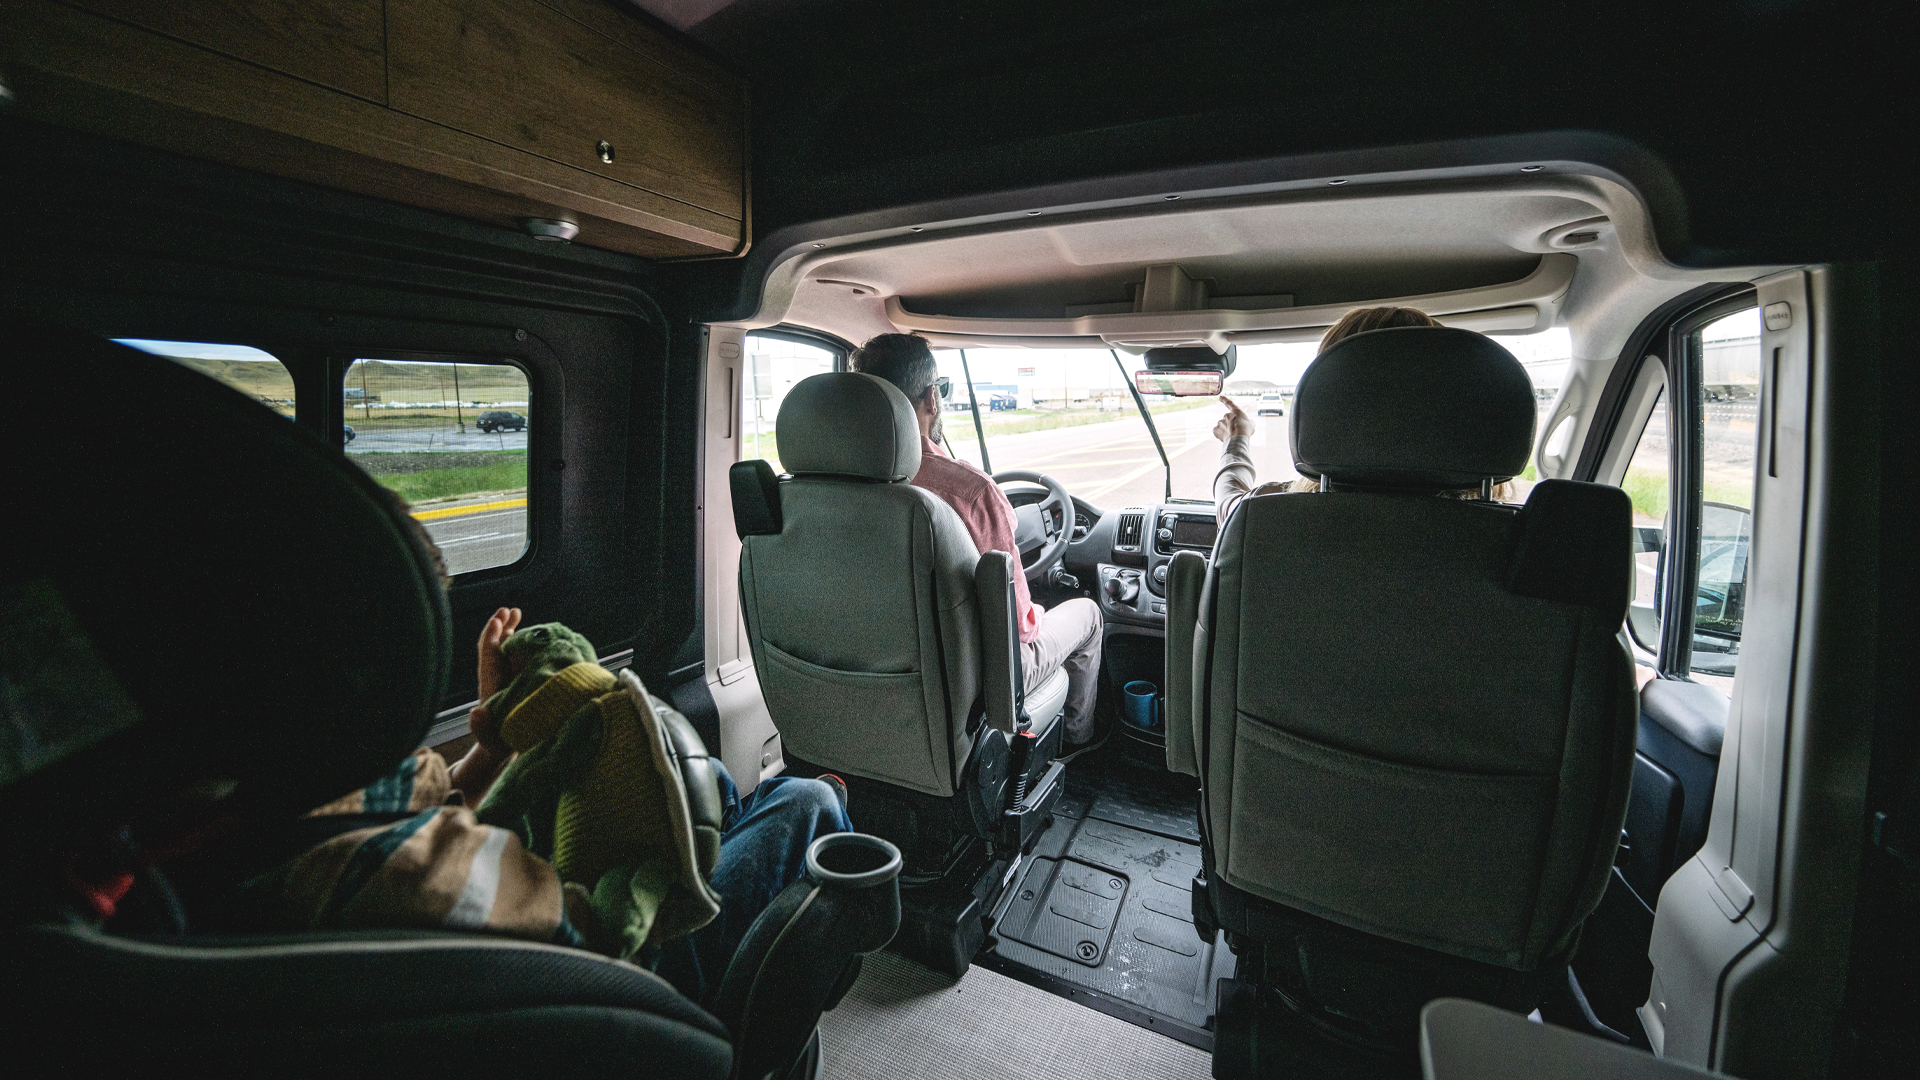 Two adults and a child buckled in and riding in the Airstream Rangeline Touring Coach.